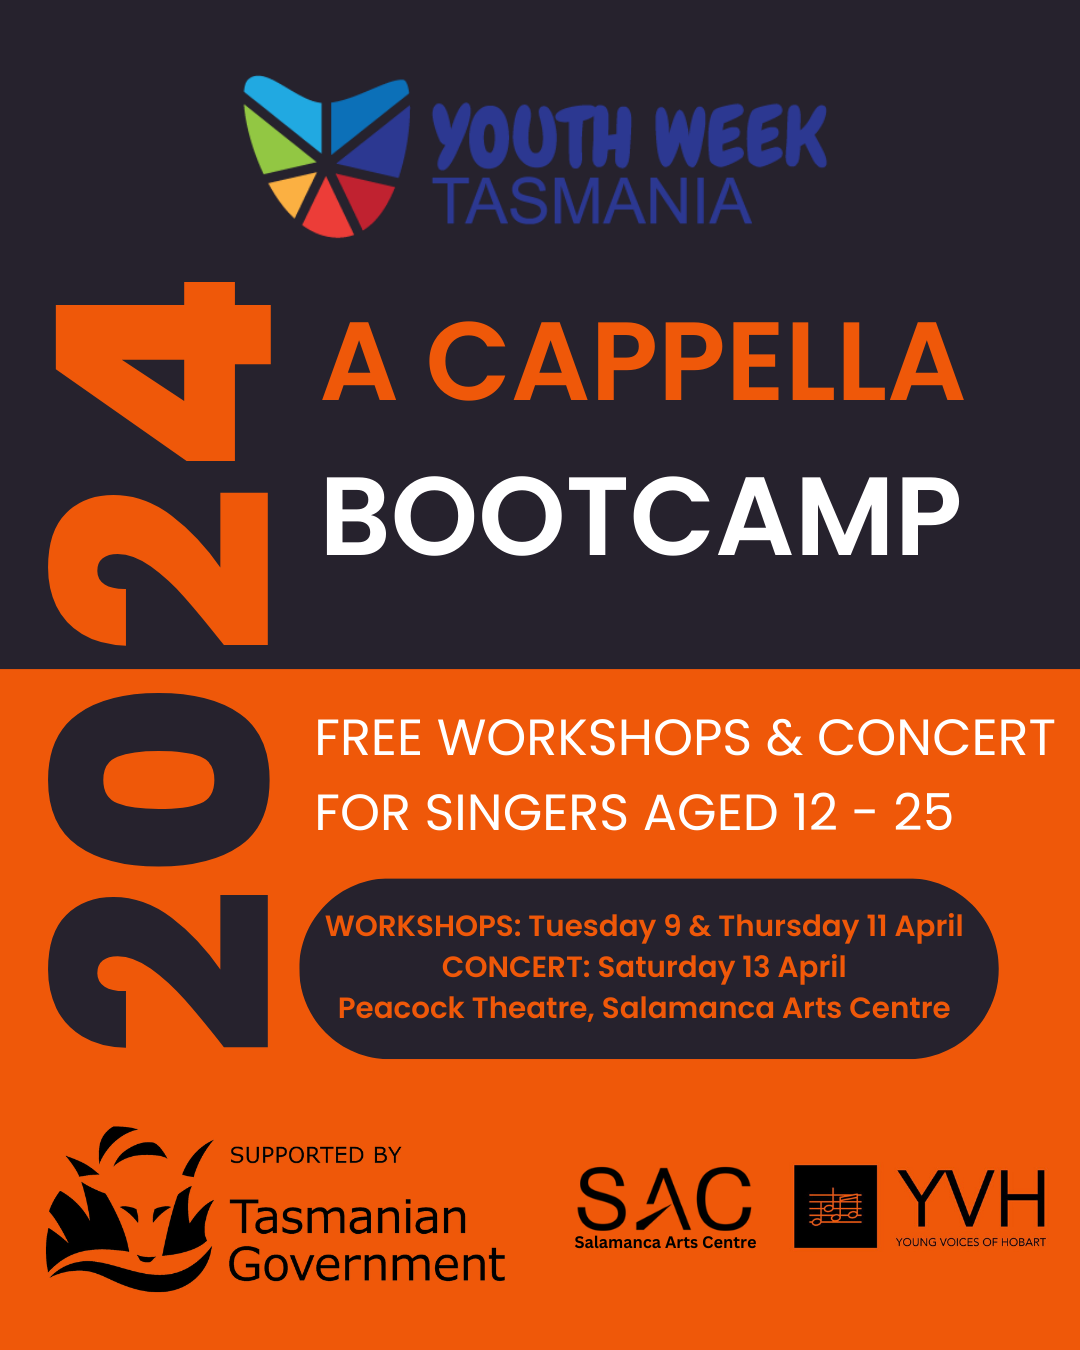 A poster promoting Young Voices of Hobart's A Cappella Bootcamp for Youth Week Tasmania 2024